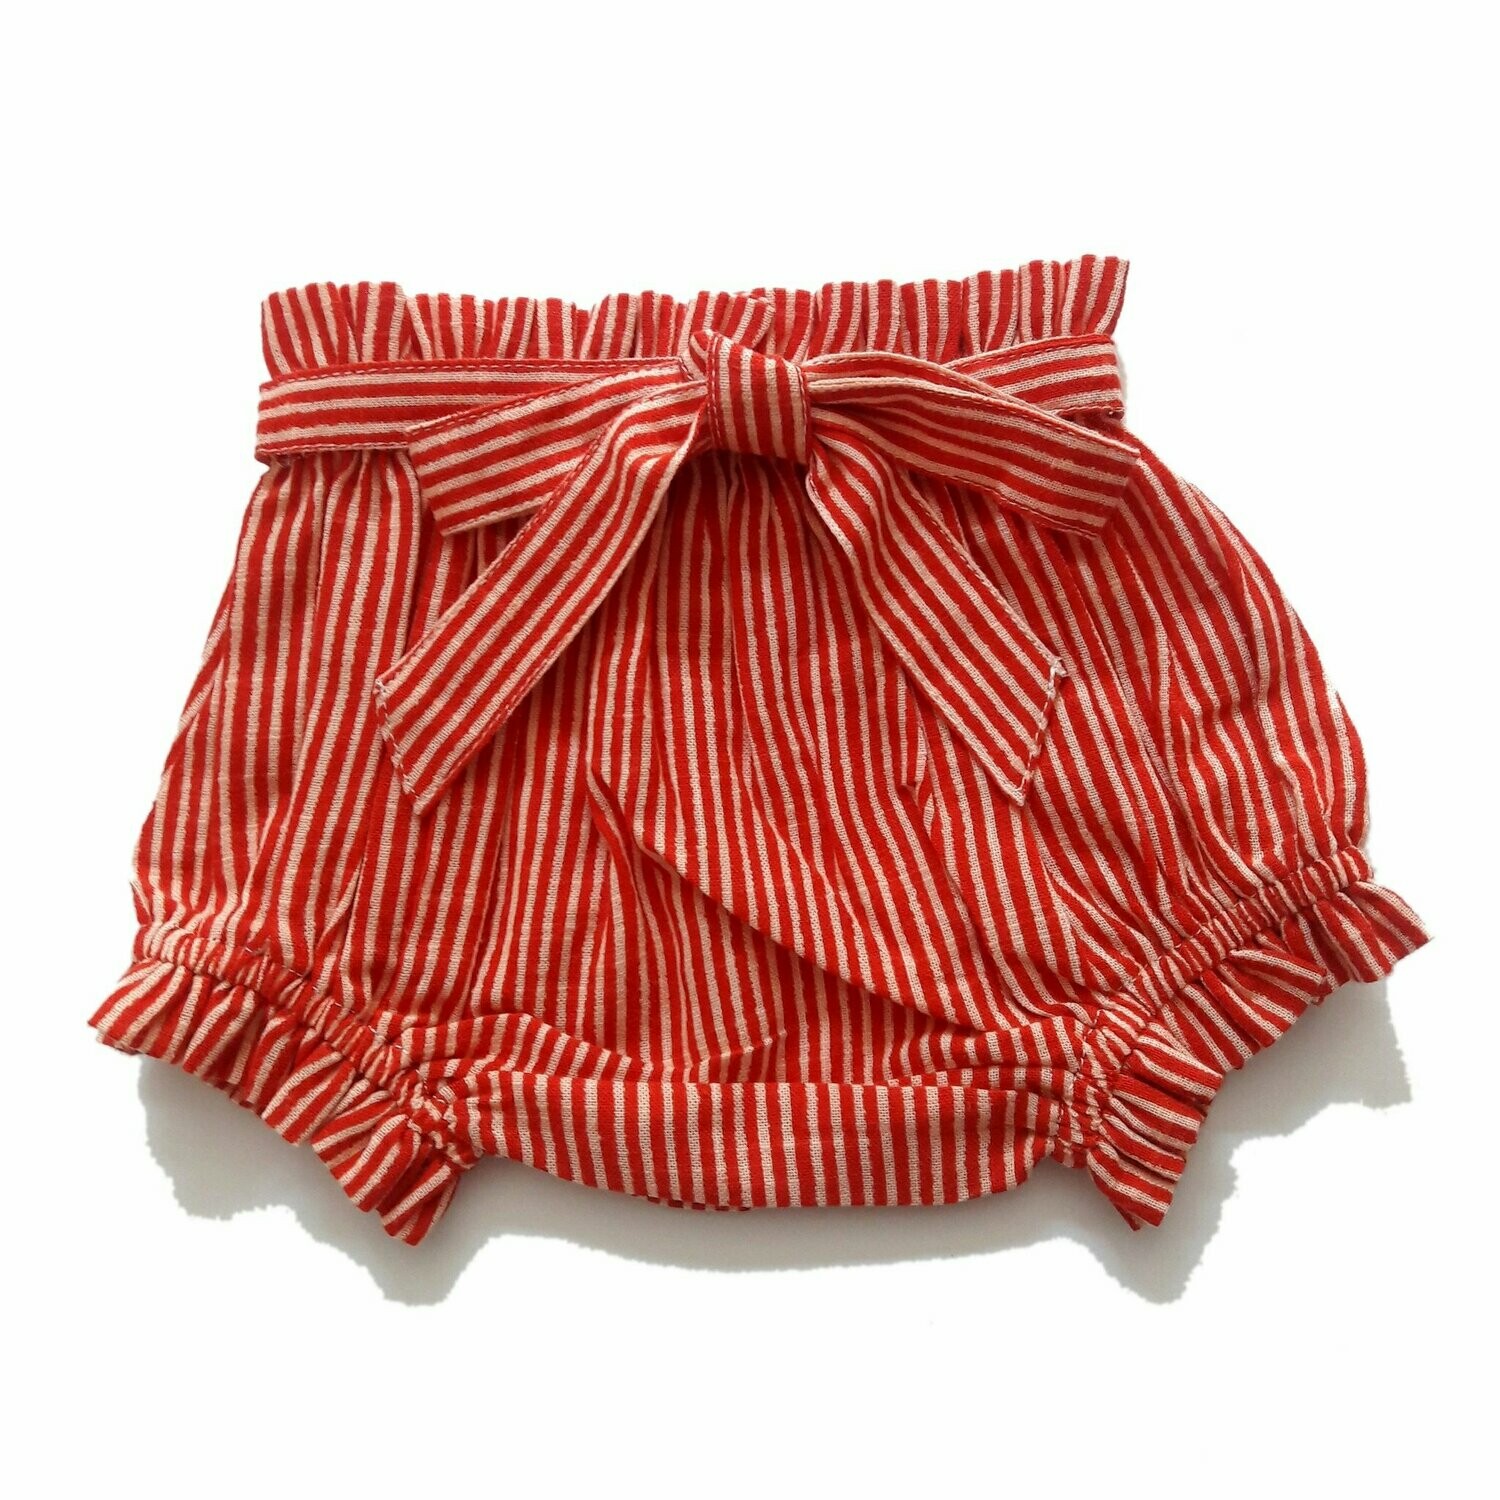 Yo Baby Bloomer Diaper Cover - Candy Stripe with Tie